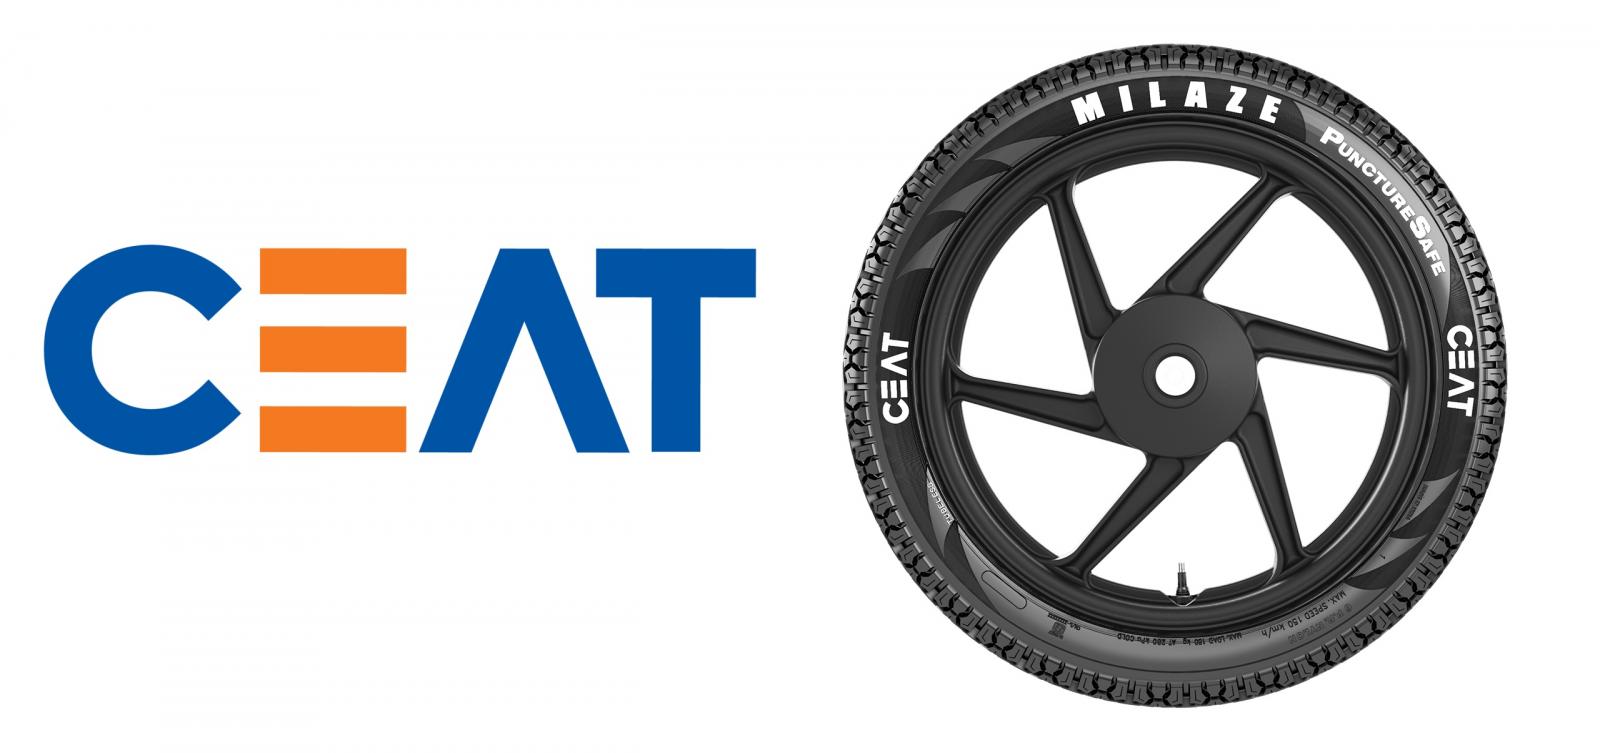 16-facts-about-ceat